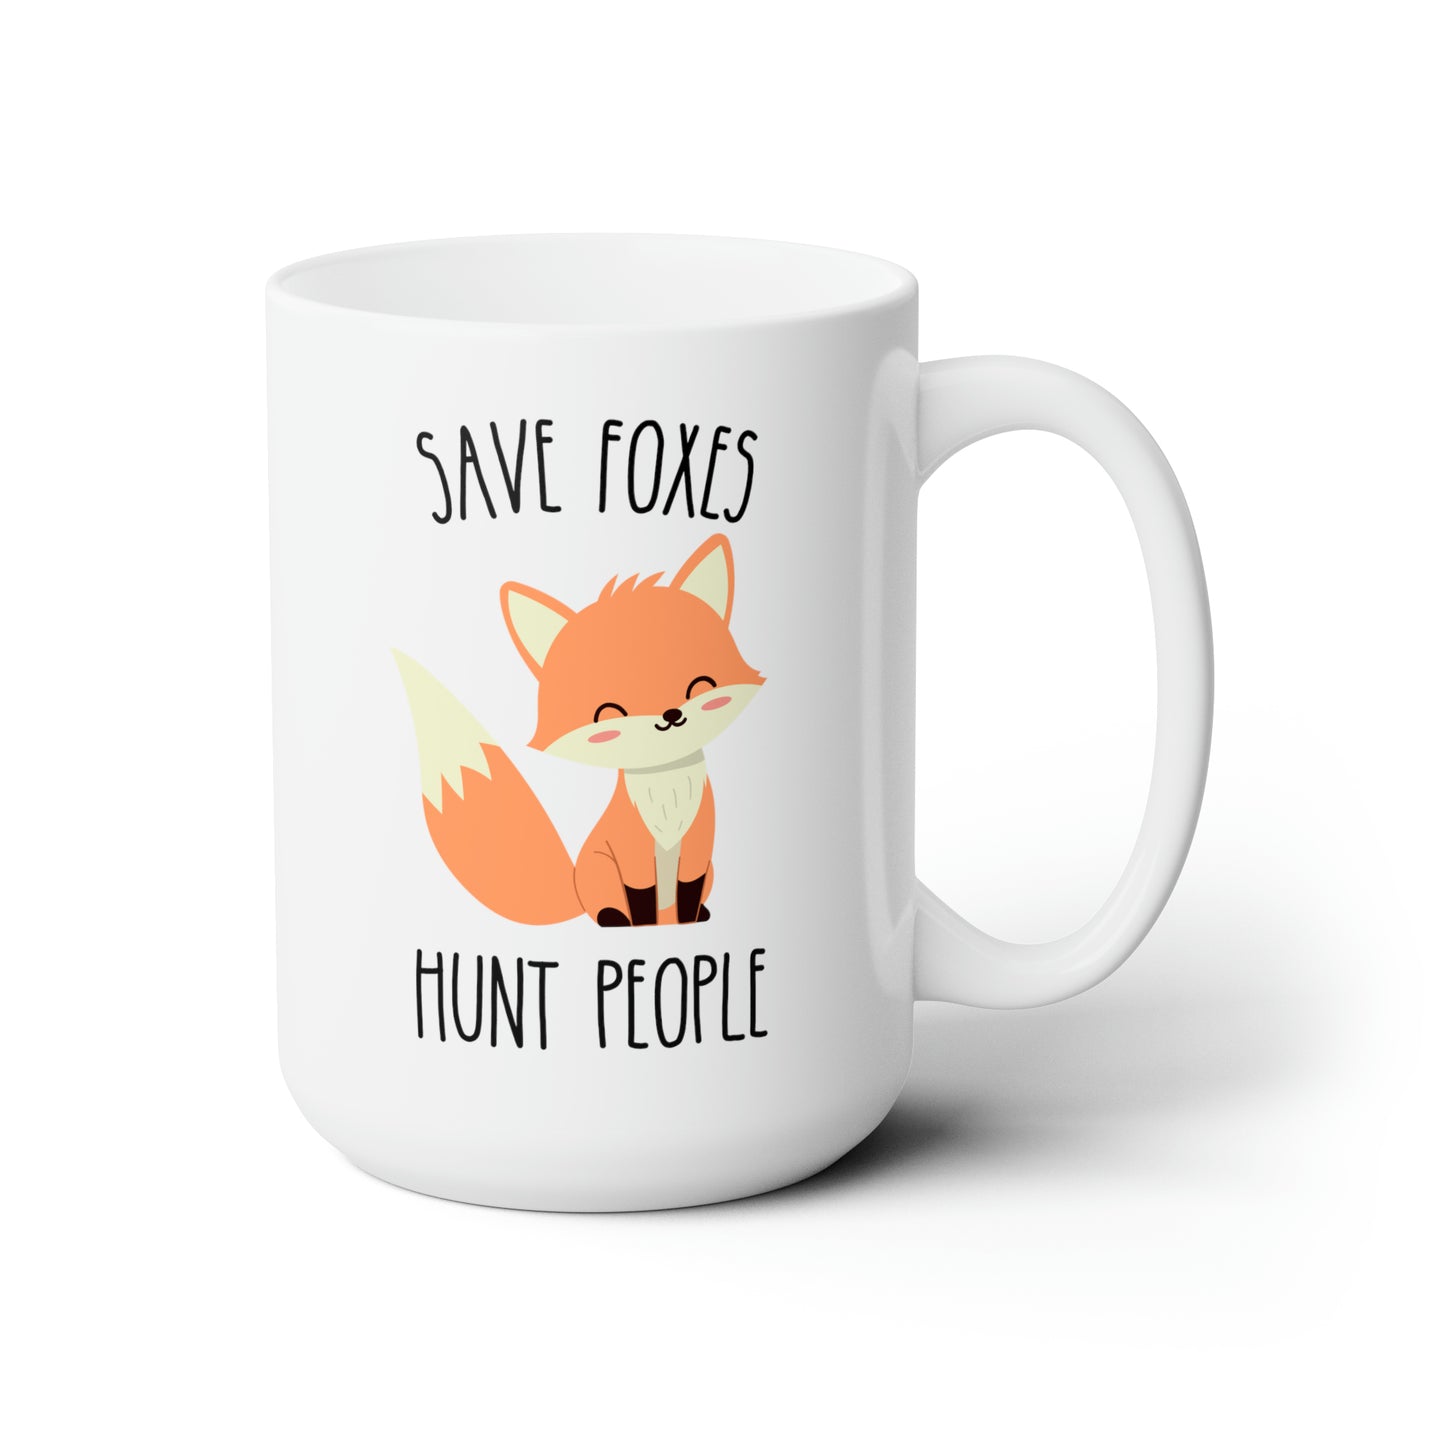 Save Foxes Hunt People 15oz white funny large coffee mug gift for vegetarian vegan animal rights cute hipster quirky rude present waveywares wavey wares wavywares wavy wares